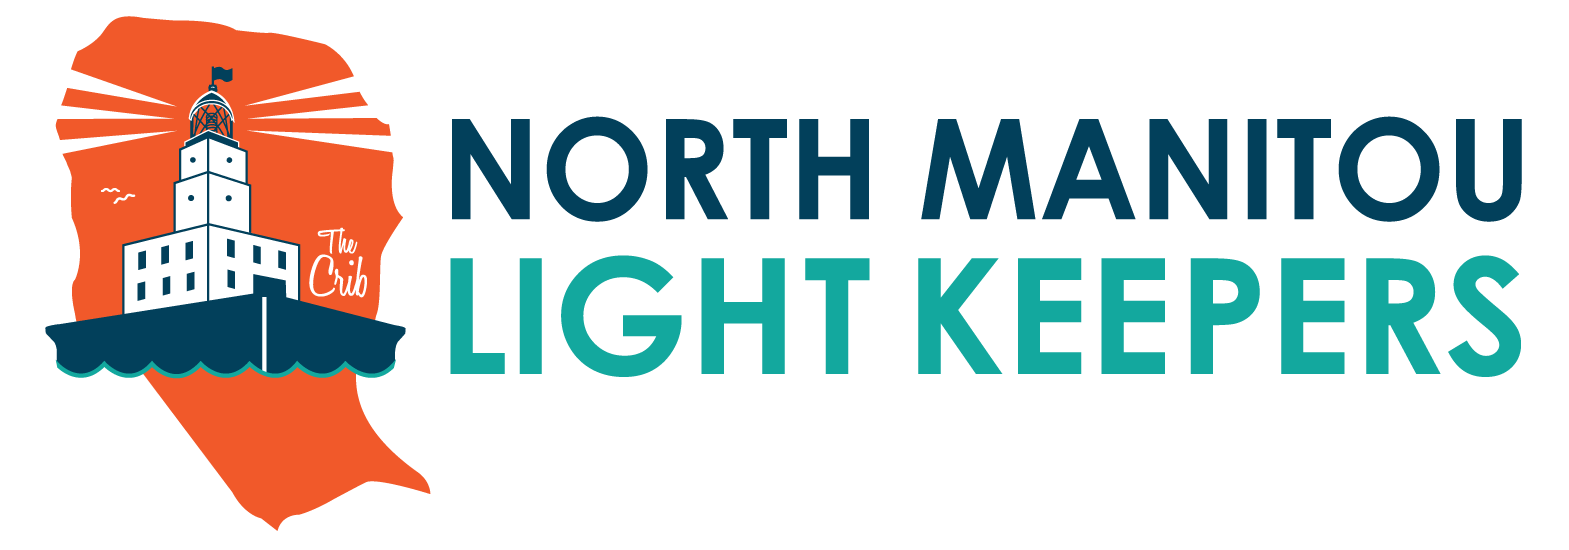 North Manitou Light Keepers